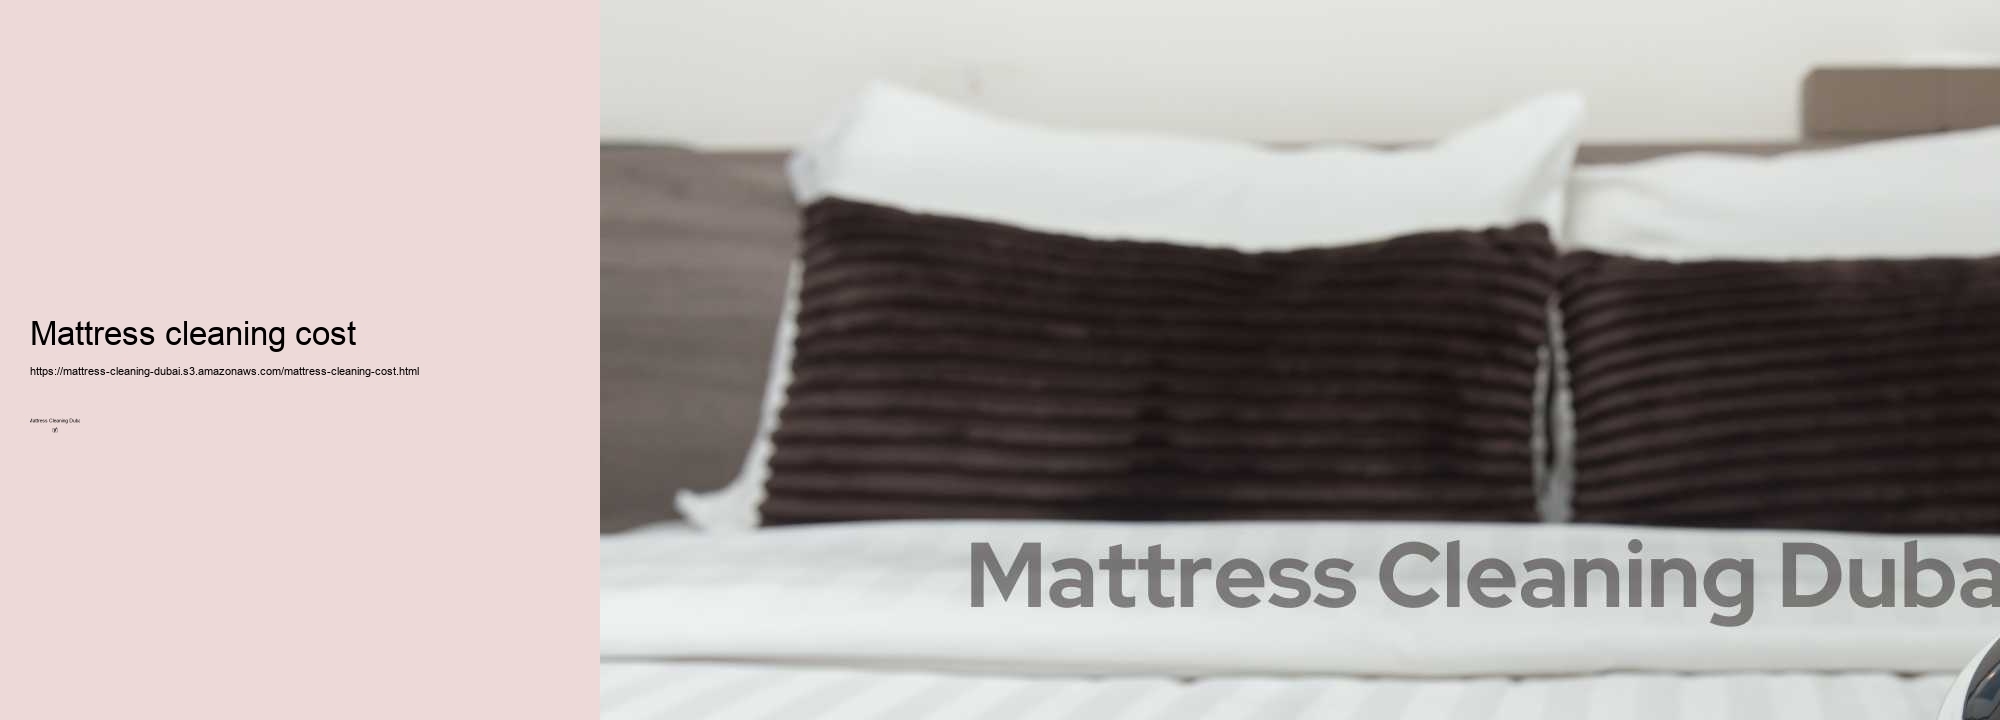 Mattress cleaning cost